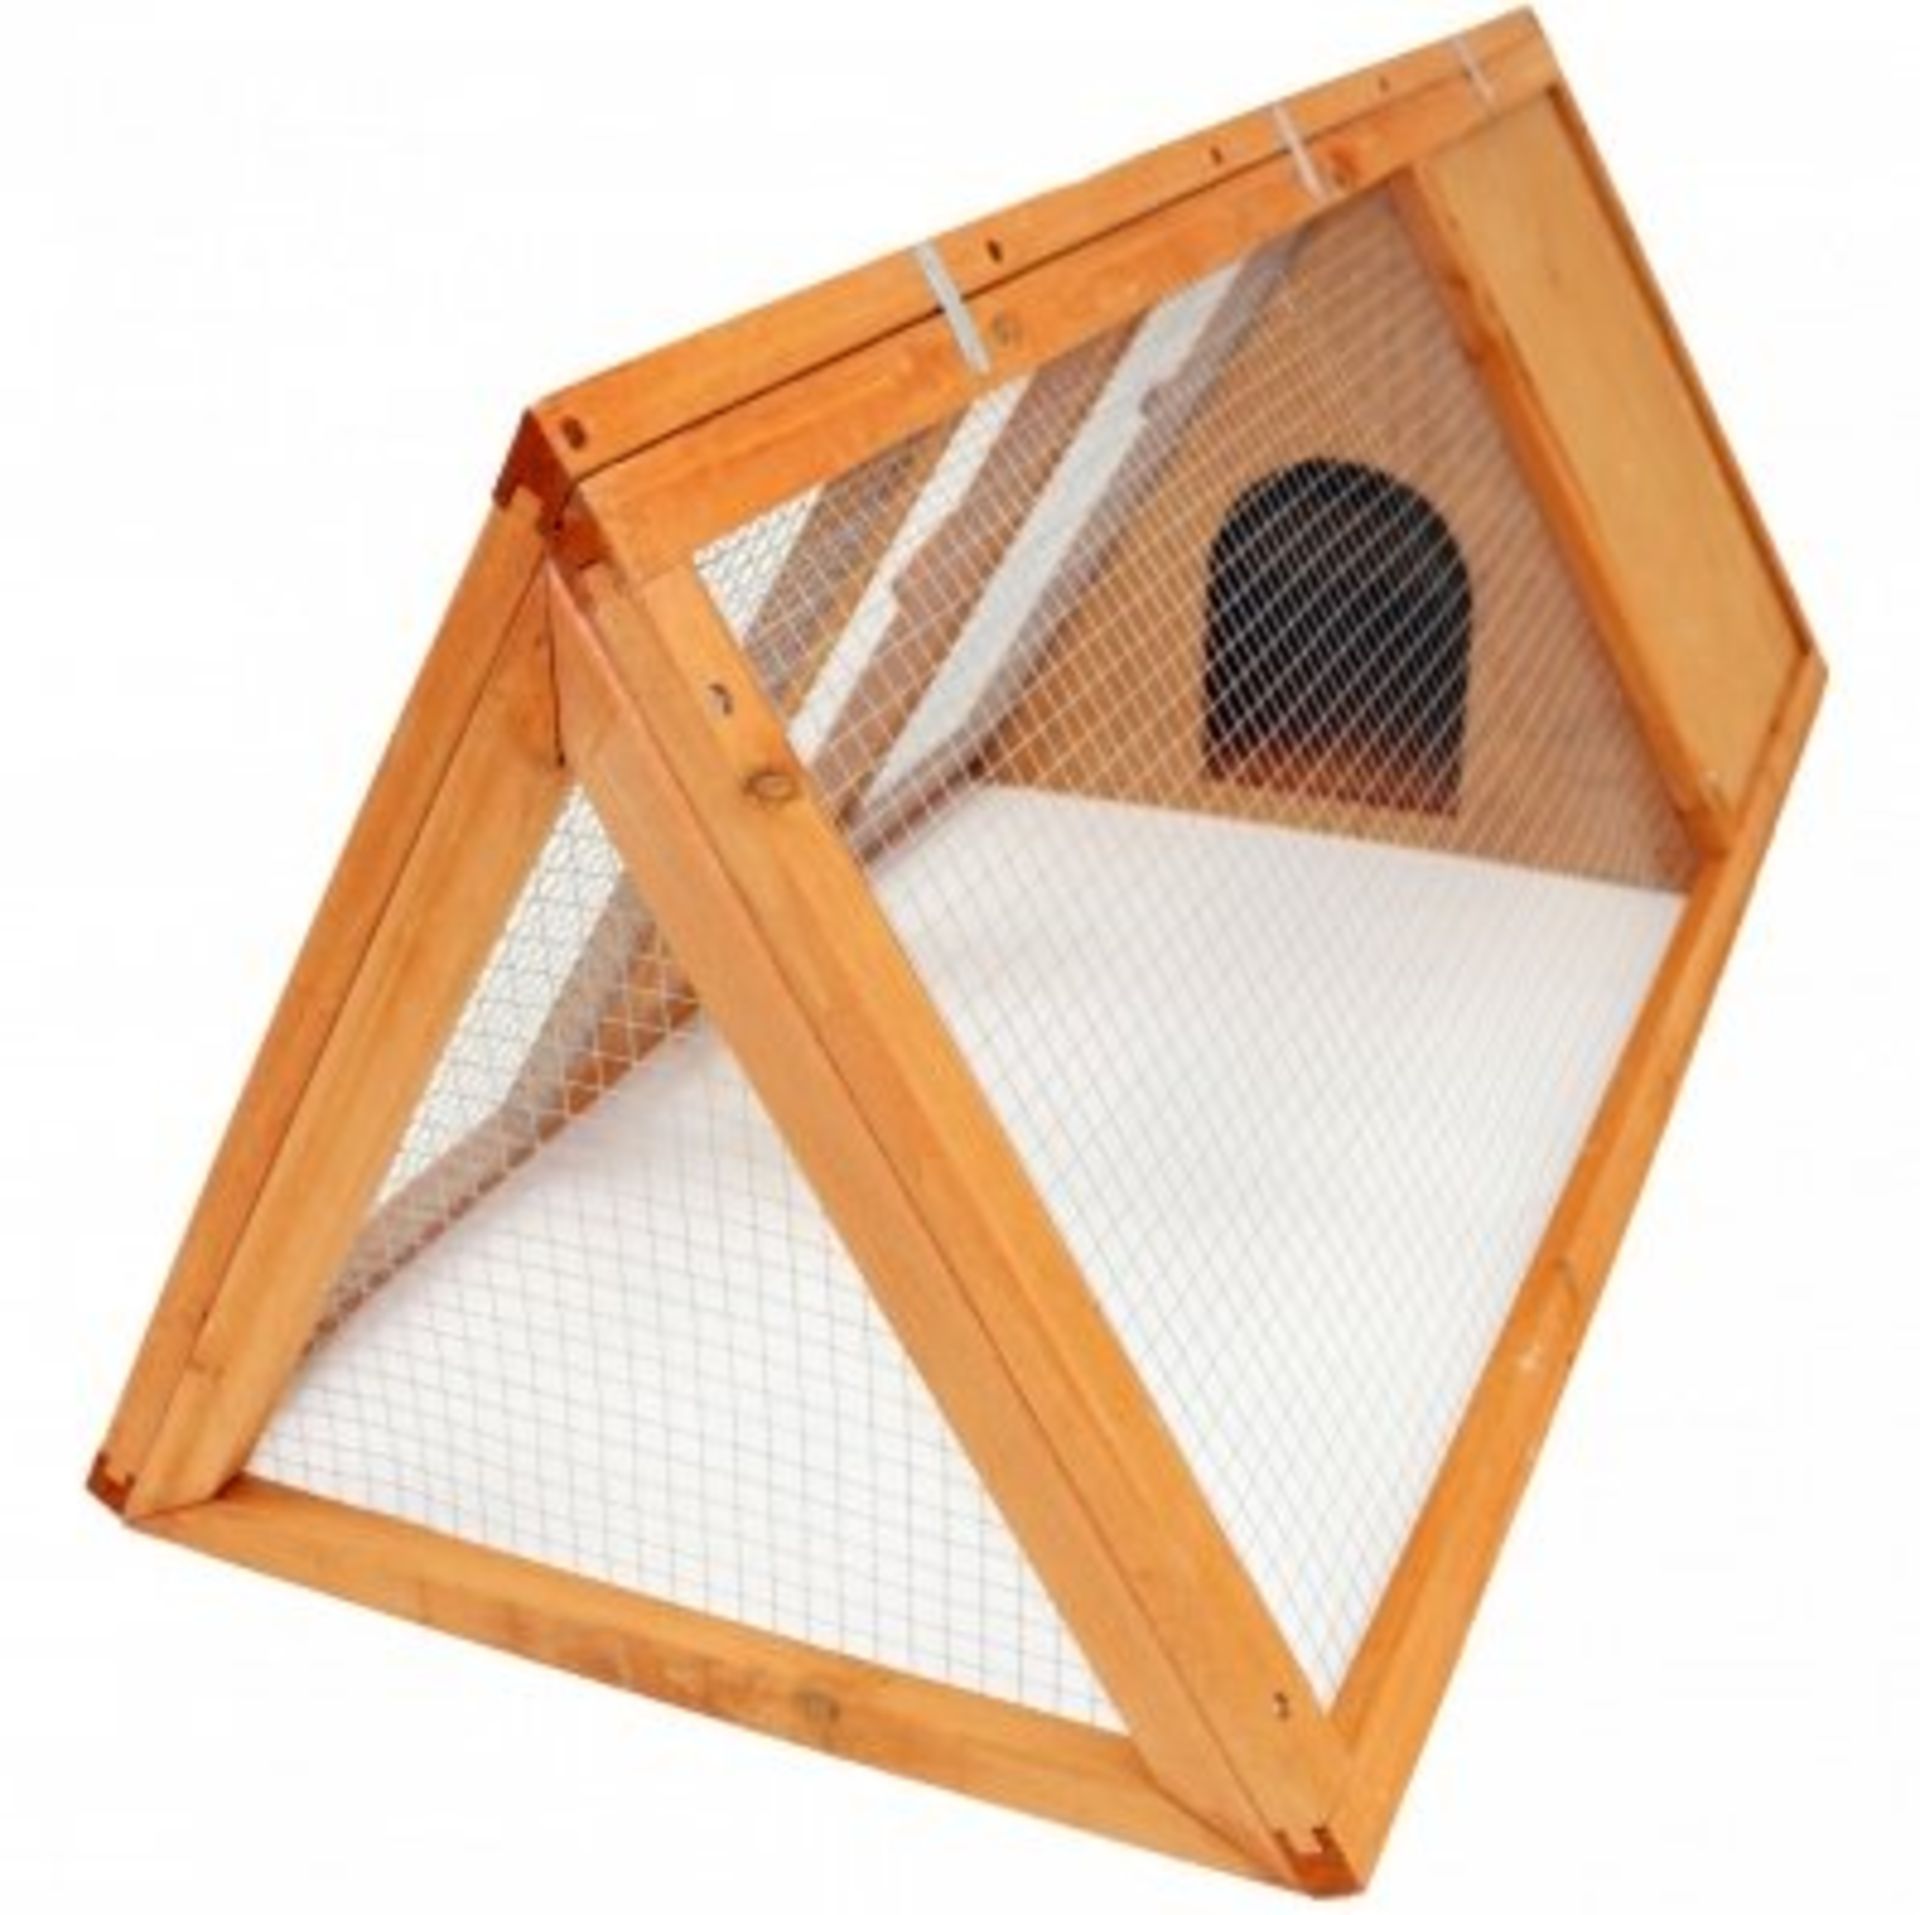 (LF176) Wooden Outdoor Triangle Rabbit Guinea Pig Pet Hutch Run Cage The triangle hutch is p...